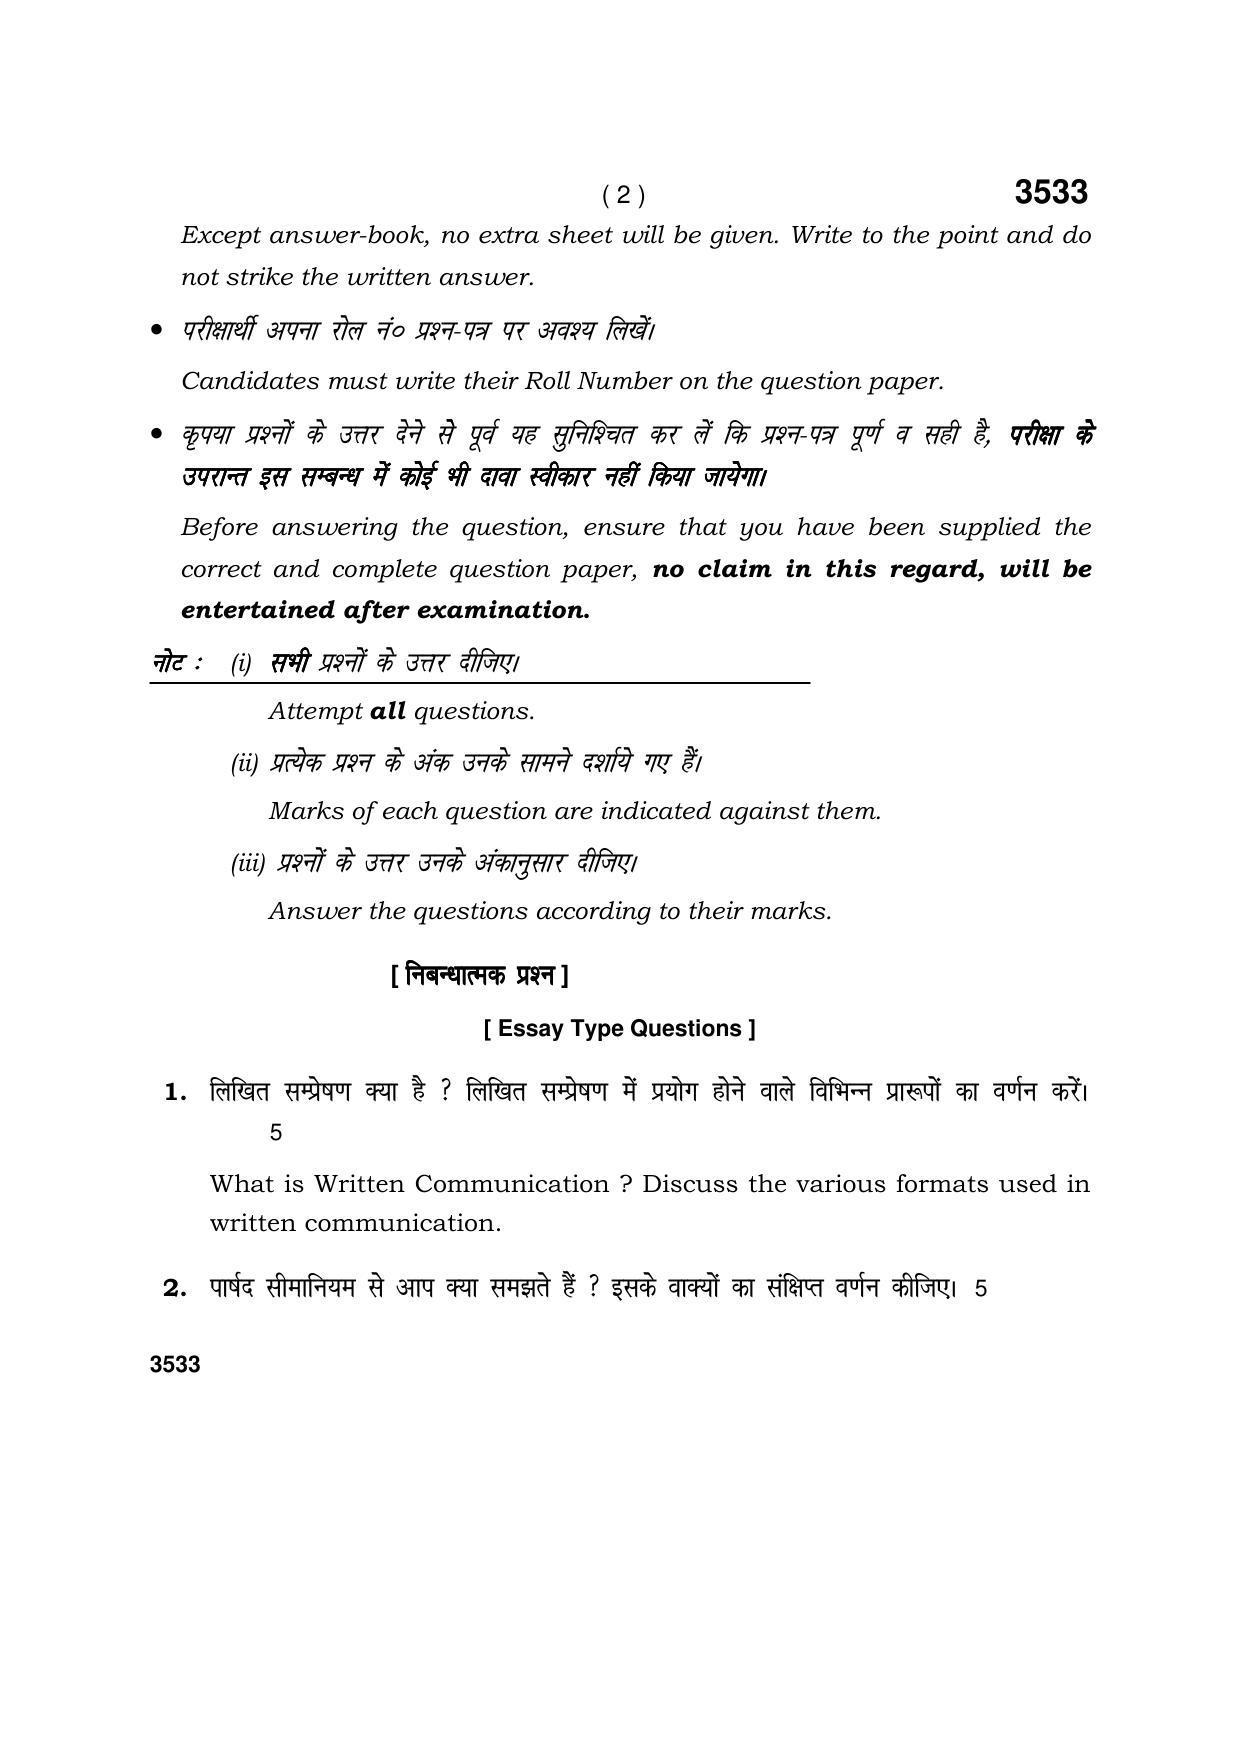 Haryana Board HBSE Class 10 Banking & Financial Services 2018 Question Paper - Page 2